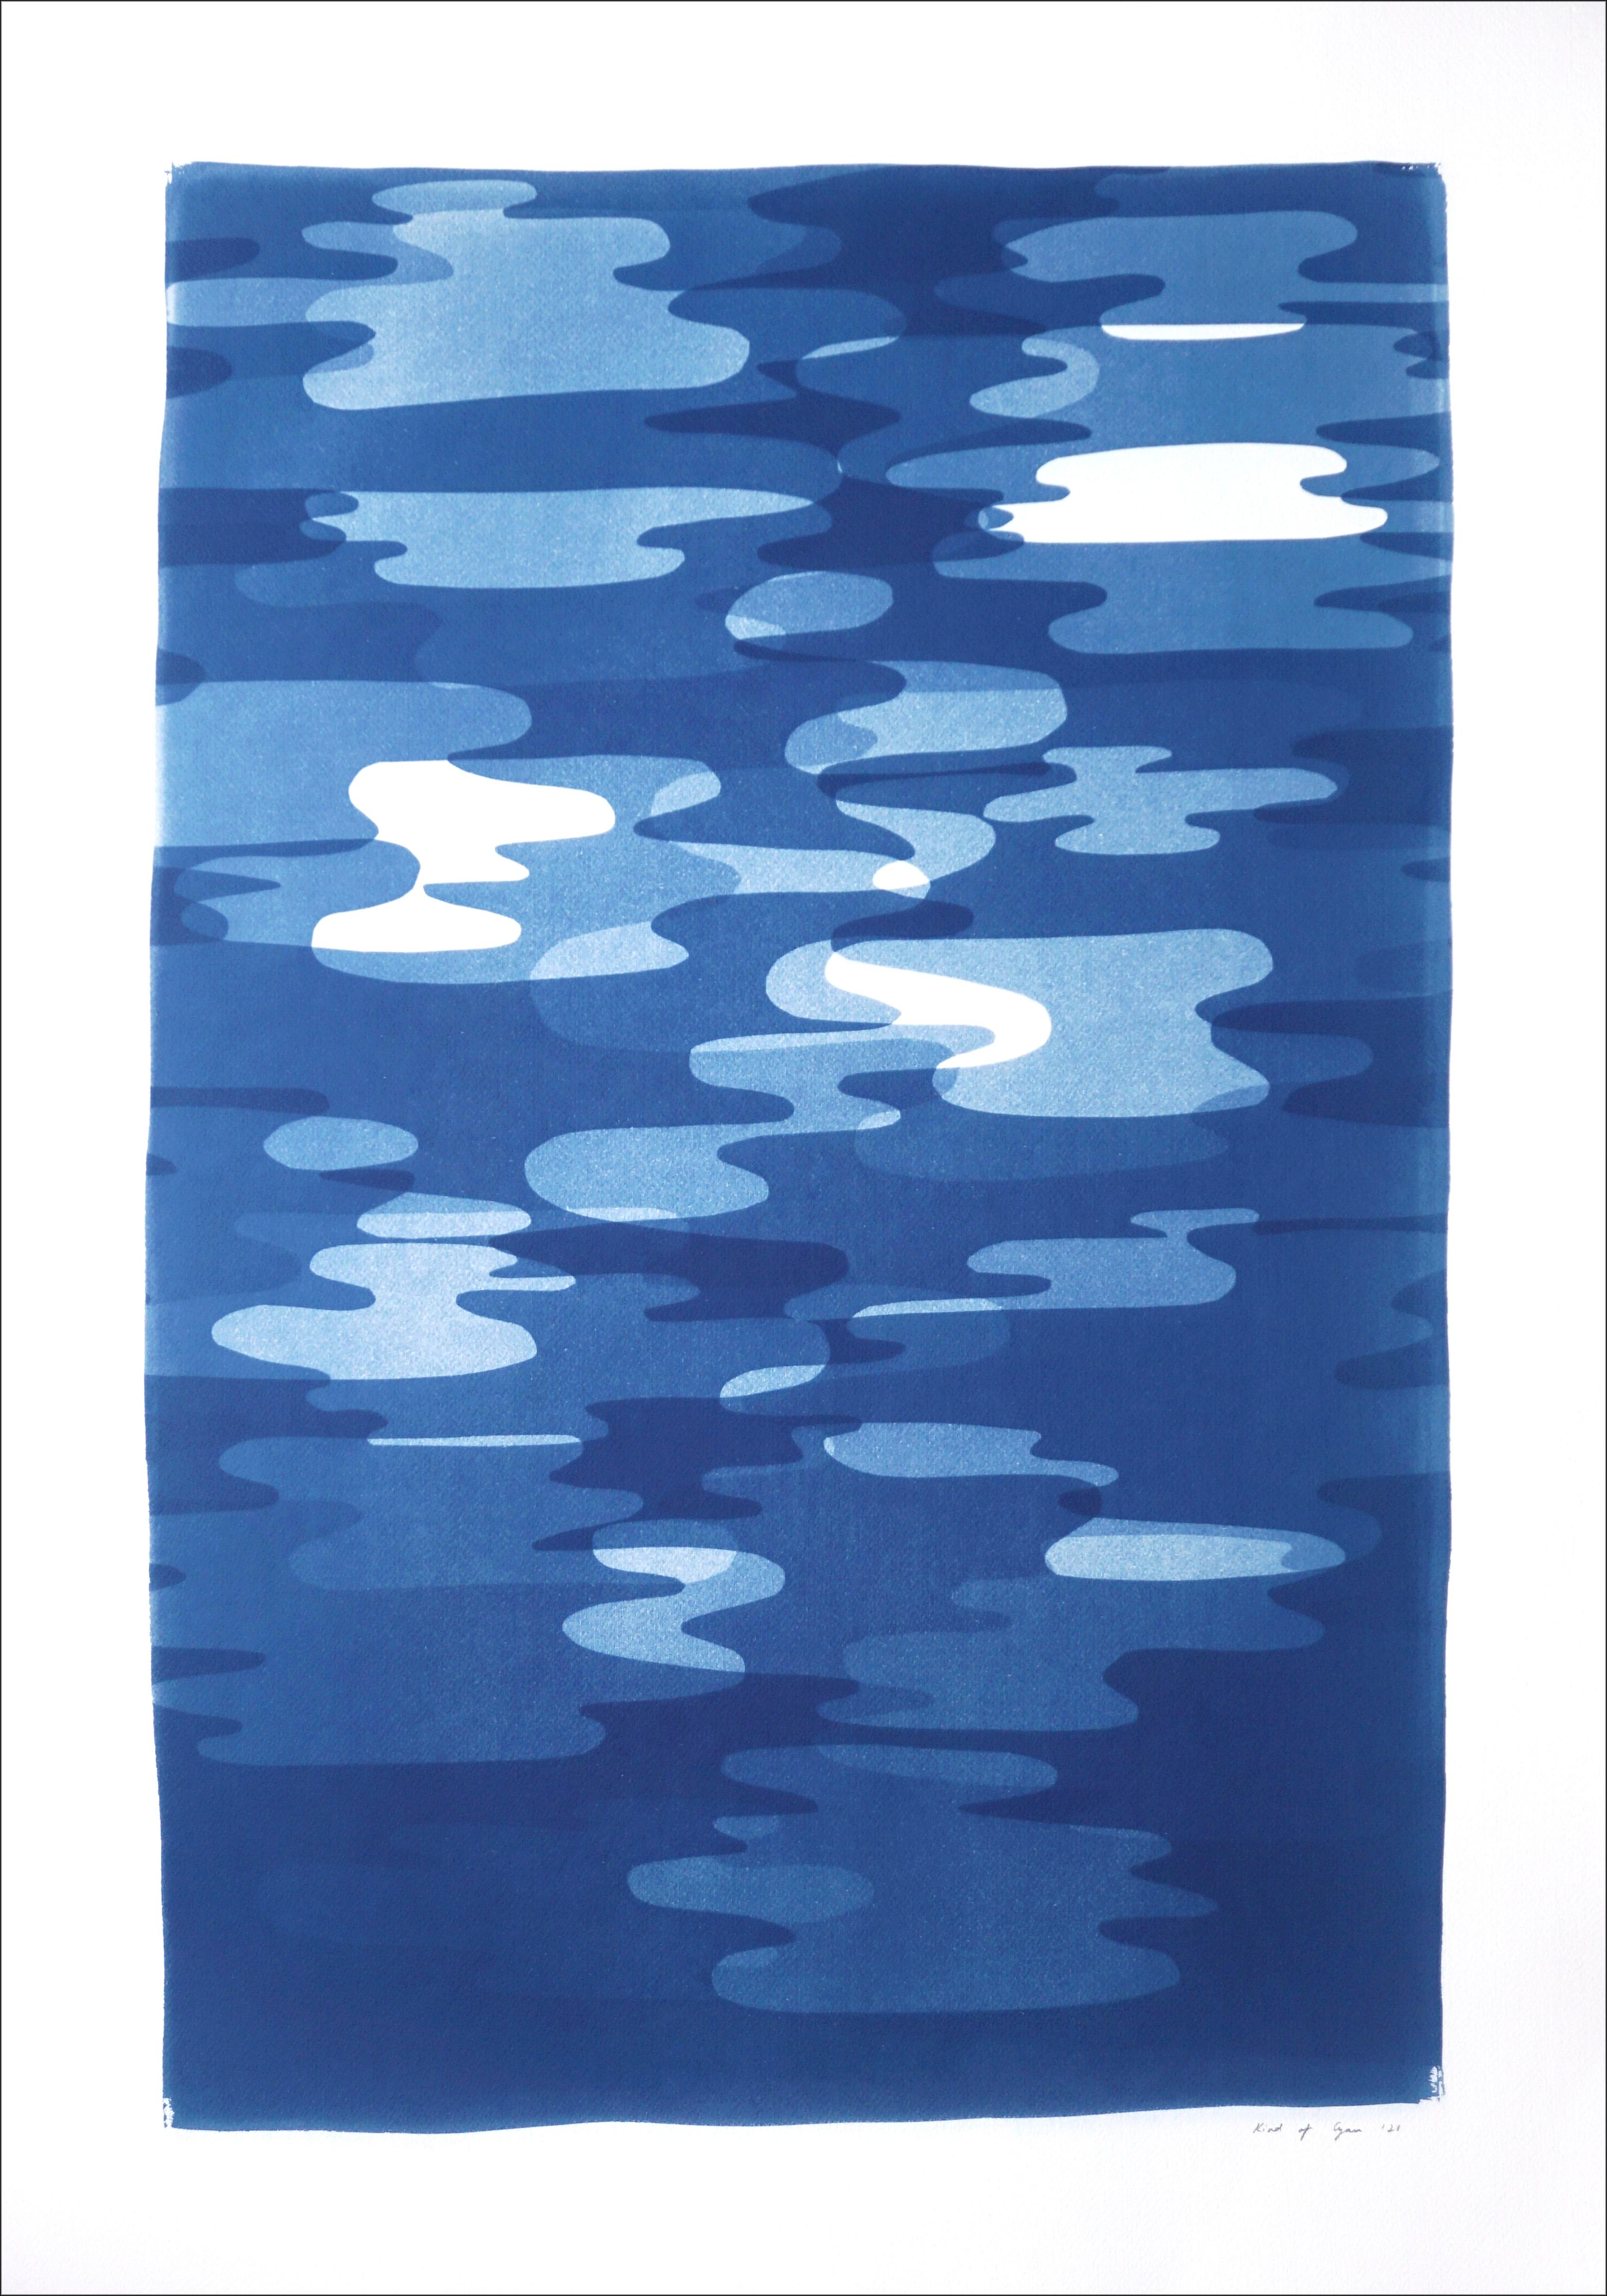 This is an exclusive handprinted unique cyanotype that takes its inspiration from the mid-century modern shapes.
It's made by layering paper cutouts and different exposures using uv-light. 

Details:
+ Title: Smoke and Mirrors
+ Year: 2021
+ Stamped